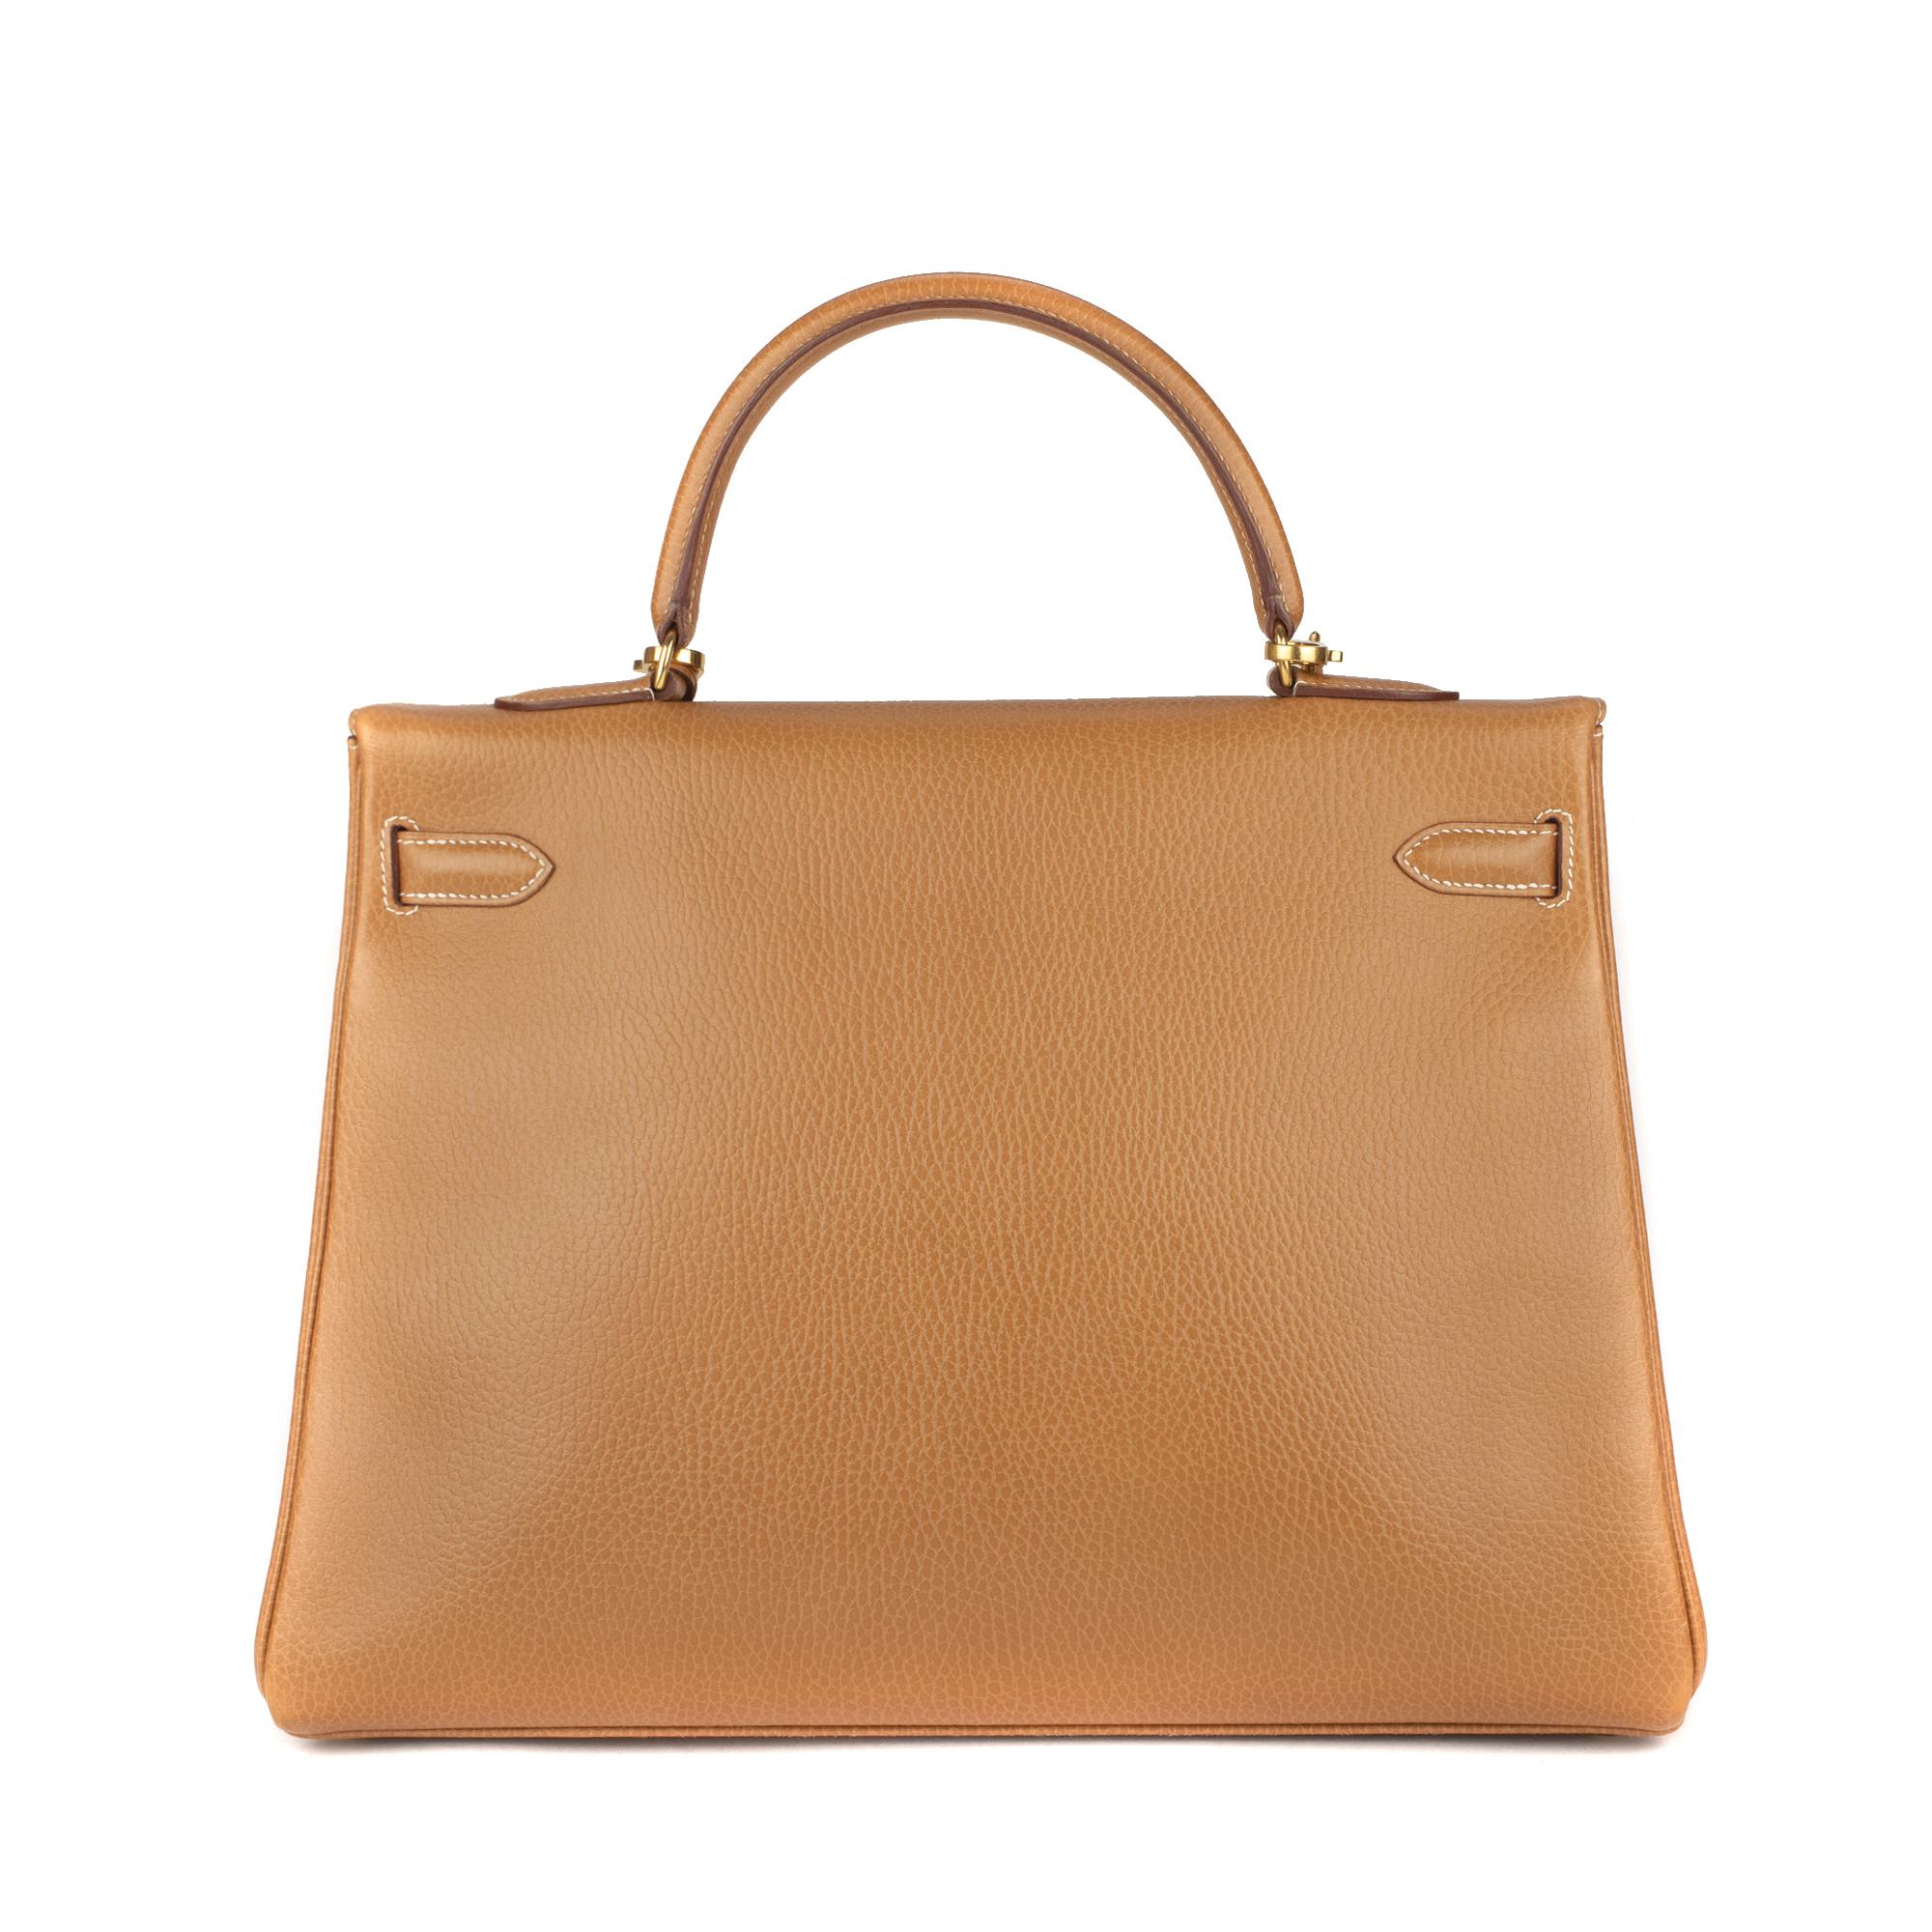  Hermes Kelly handbag 35 cm in Ardennes gold, gold-plated hardware, gold leather handle, detachable shoulder strap in gold Ardennes allowing a hand or shoulder carry.

Flap closure.
Inner lining in gold leather, a zipped pocket, a double patch